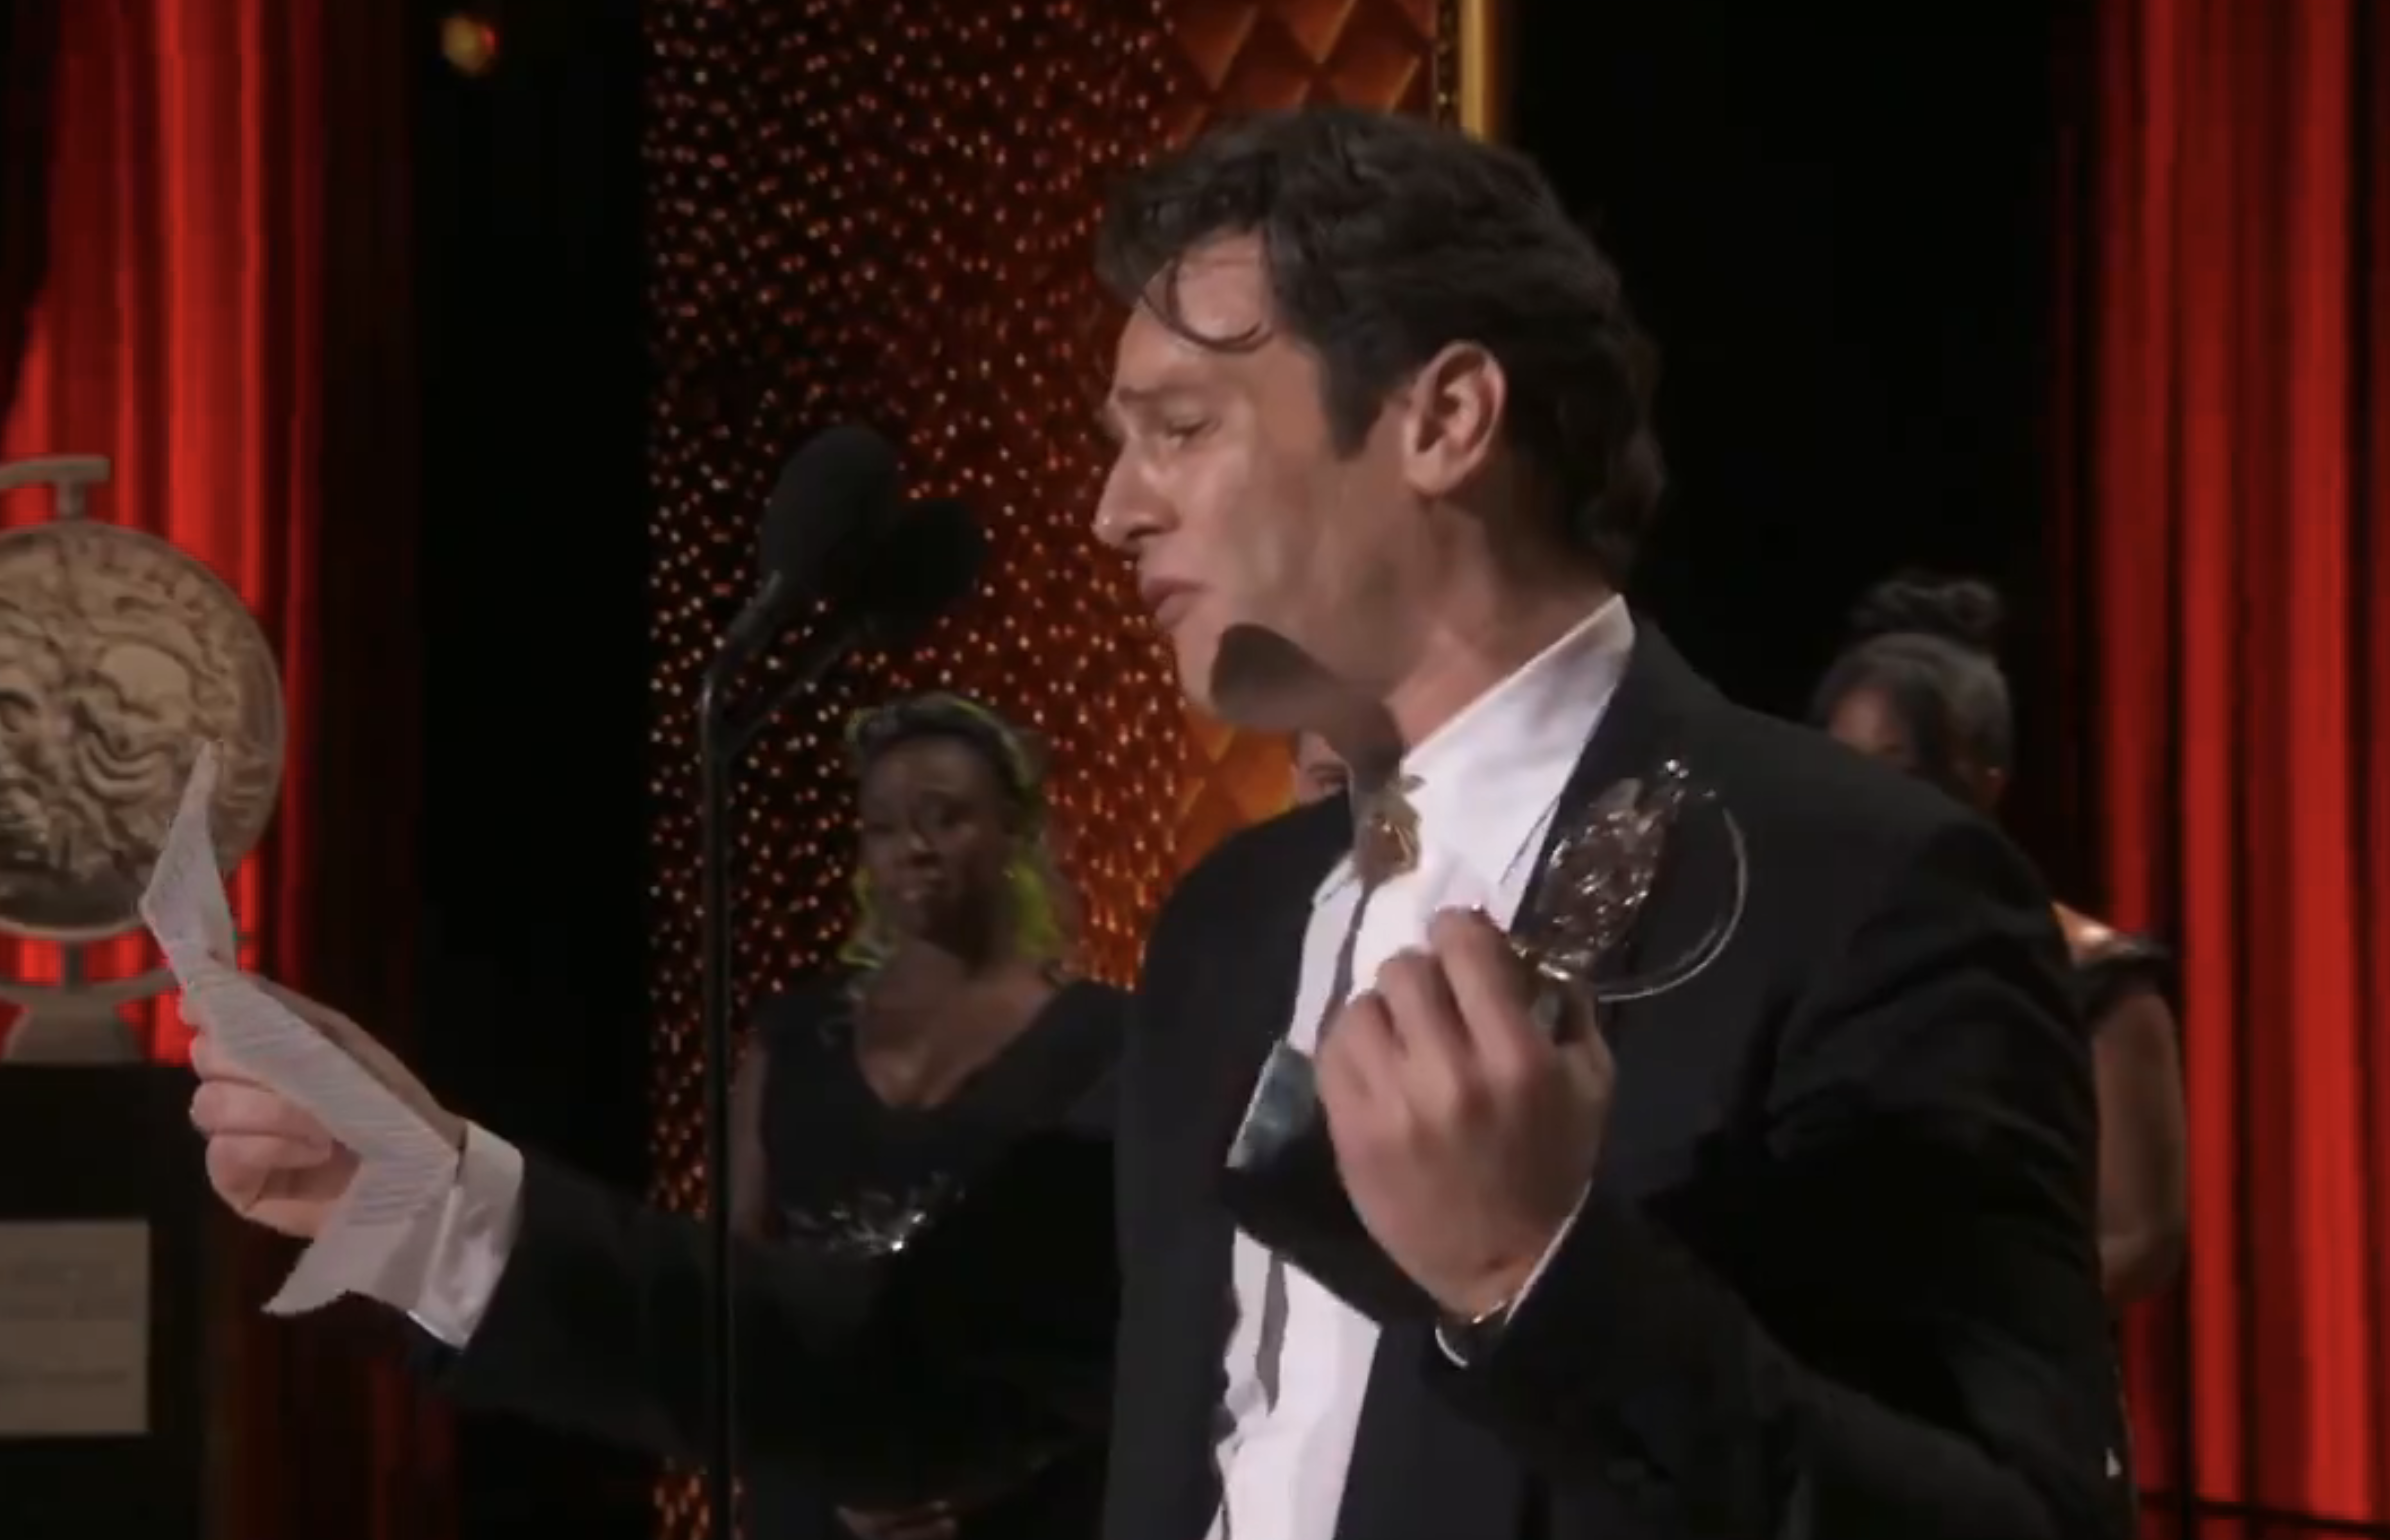 Jonathan Groff, holding a Tony and reading from a piece of paper, gives an acceptance speech on stage, with two people standing in the background